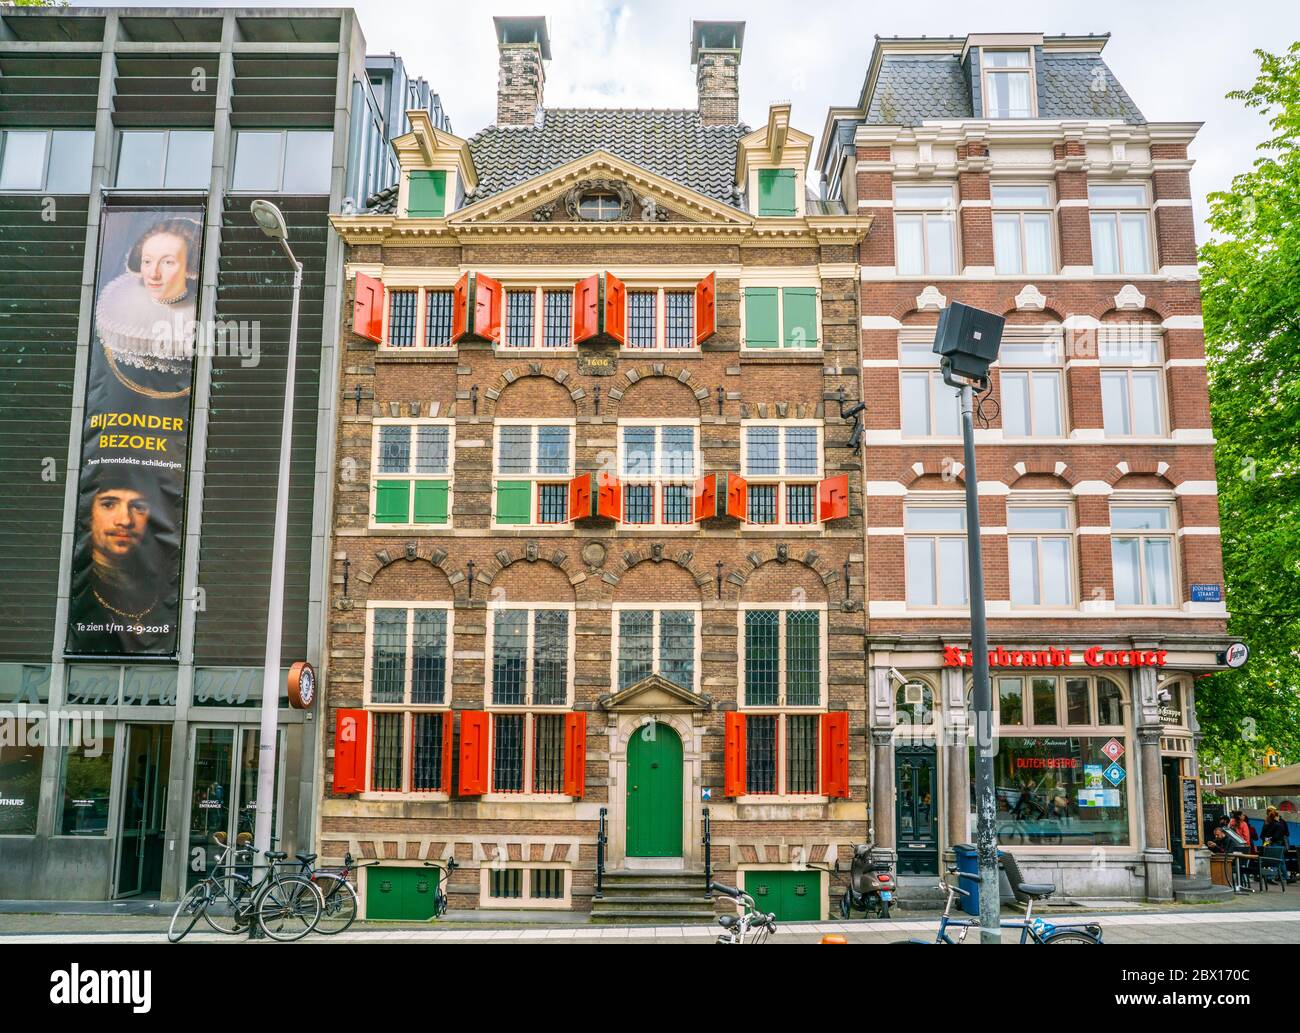 Amsterdam May 18 2018 - The Rembrandt House Museum where Rembrandt painted most of his paitings in the old Jewish quarter of Amsterdam Stock Photo